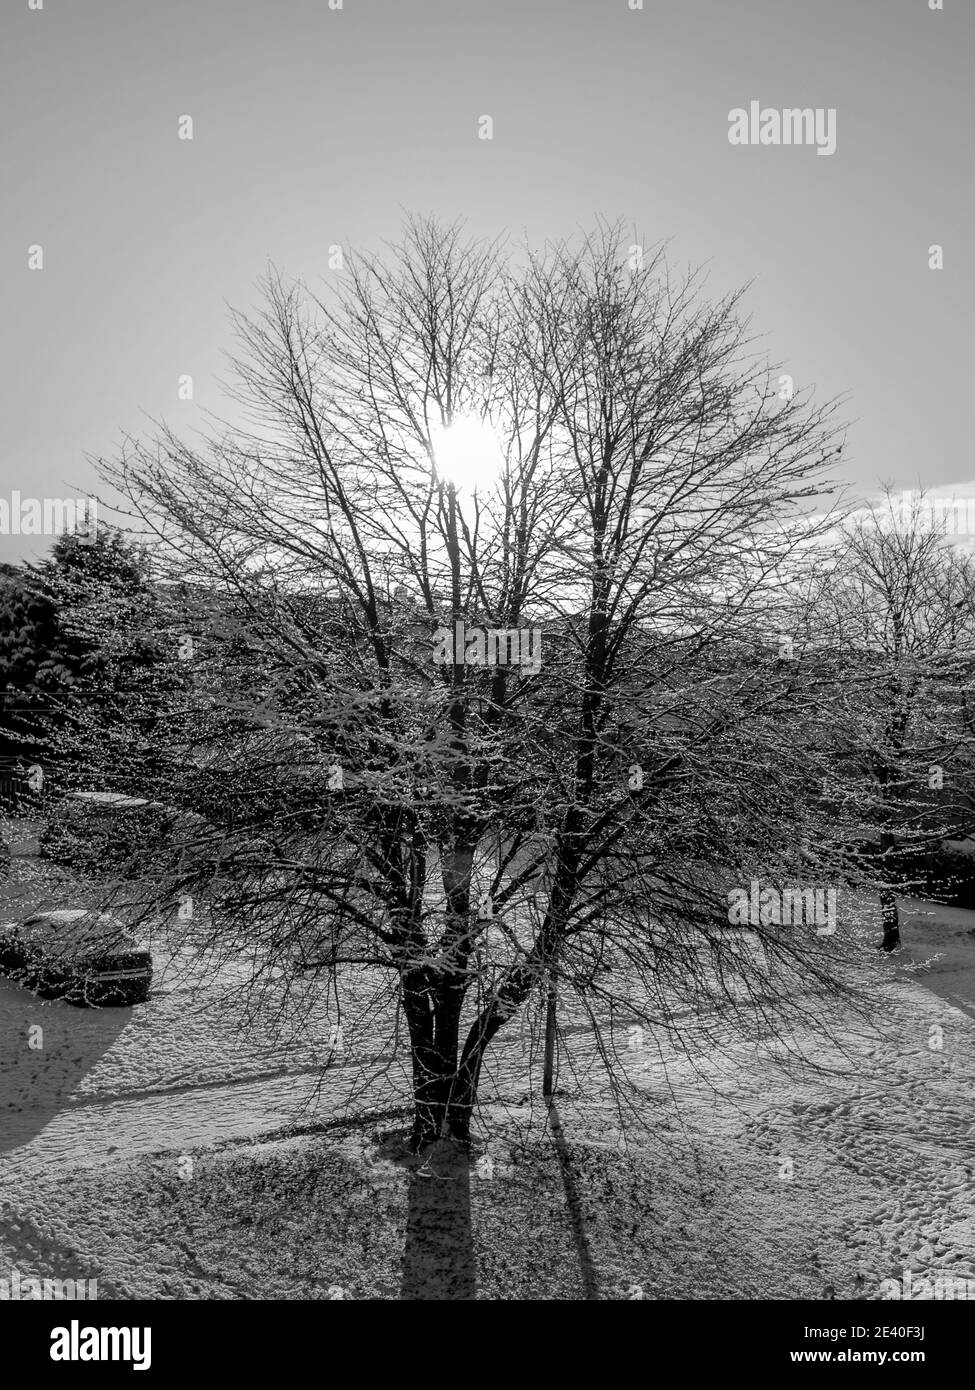 A black and white photograph of sunlight shining through the branches of a tree. Stock Photo